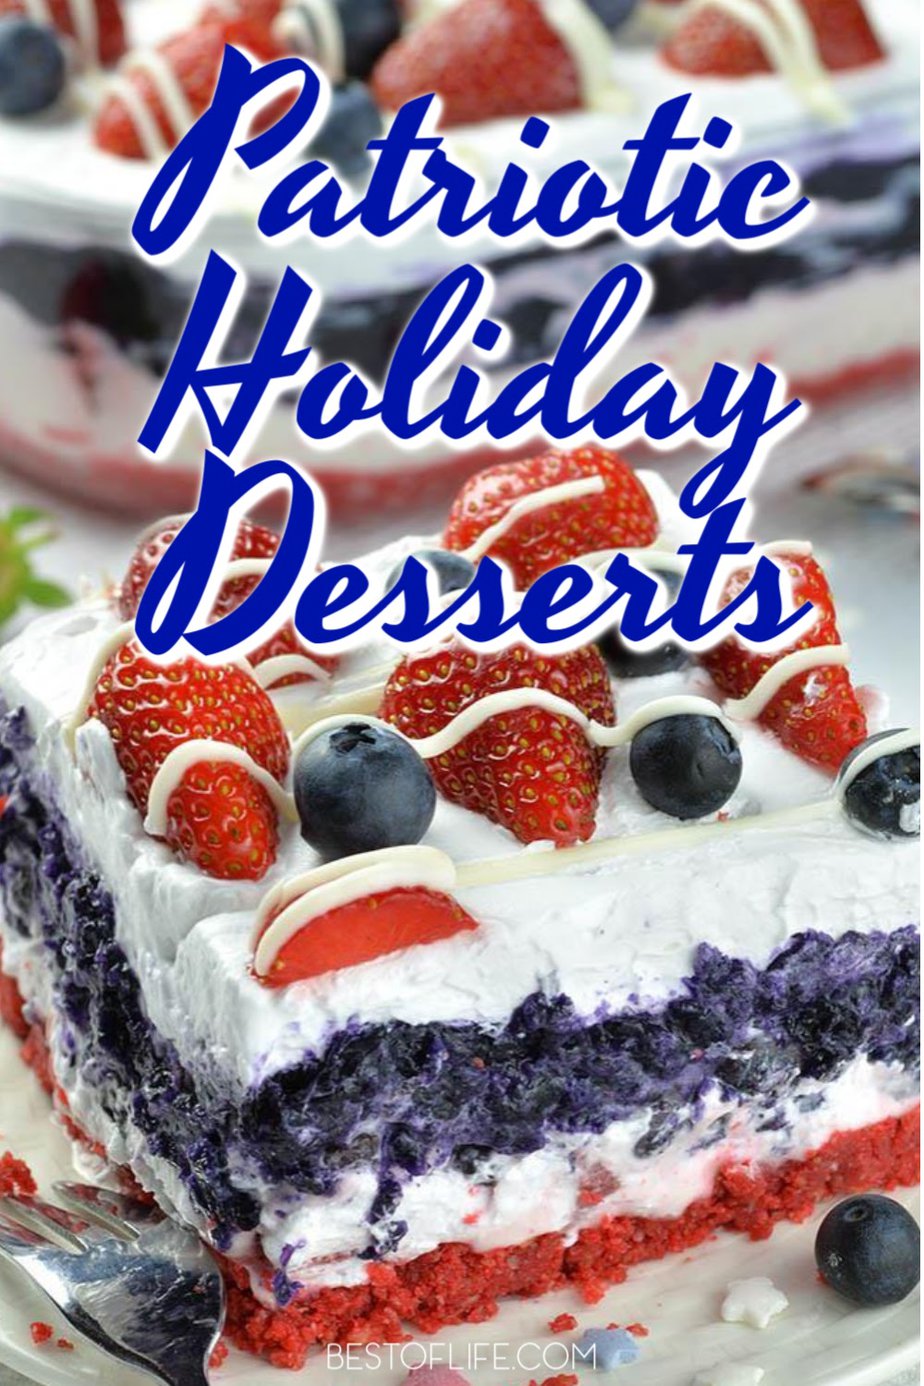 Make the best red white and blue desserts for your Fourth of July party and enjoy them as you watch the night sky illuminate with patriotic colors. Fourth of July Dessert Recipes | Patriotic Desserts | 4th of July Dessert Recipes | 4th of July Recipes | Patriotic Recipes #4thofjuly #recipes